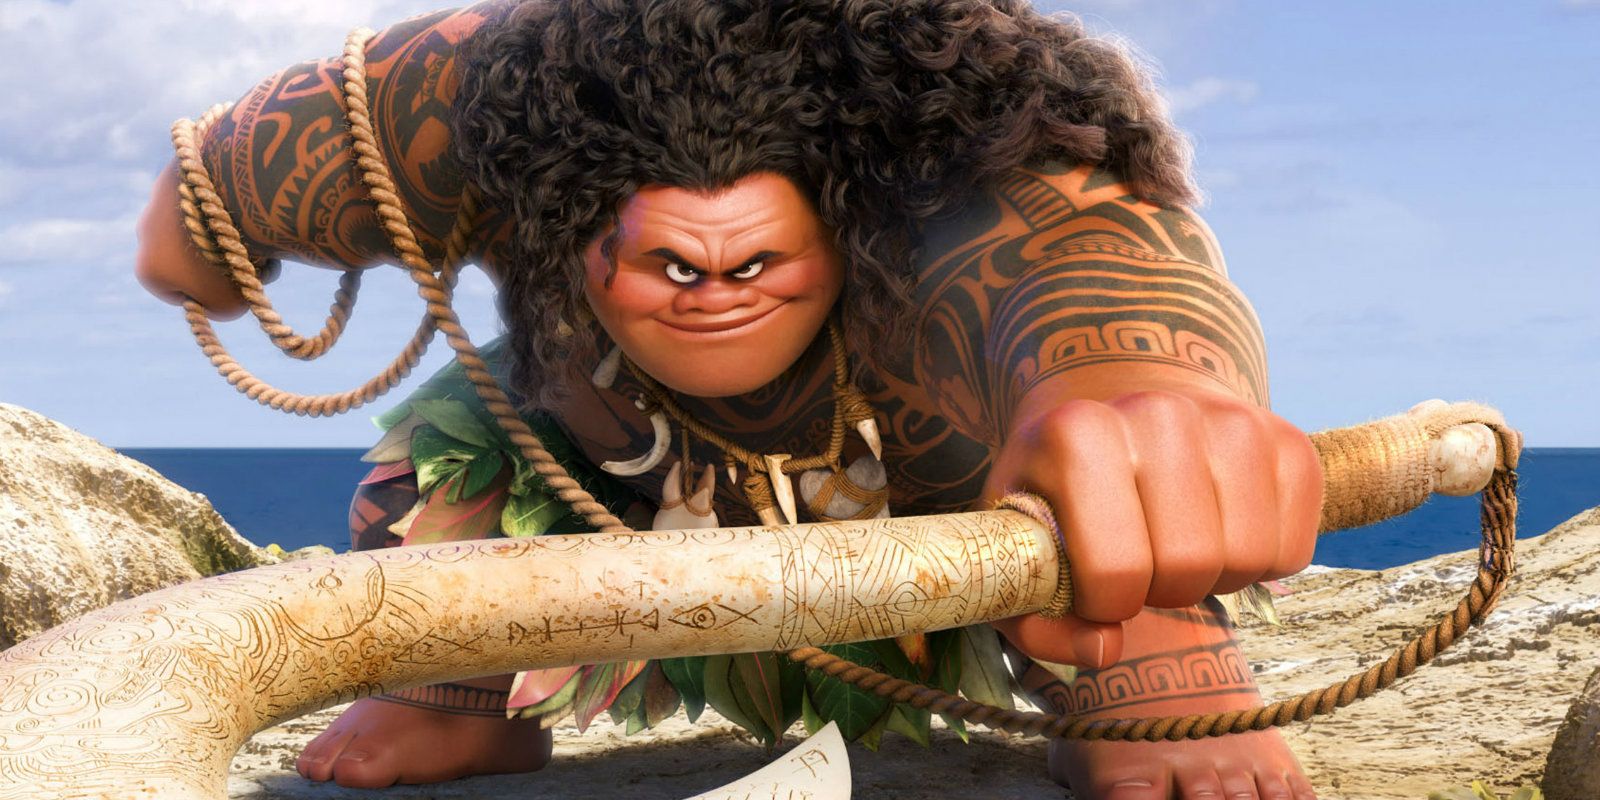 Disney Pulls Controversial 'Moana' Costume After Complaints